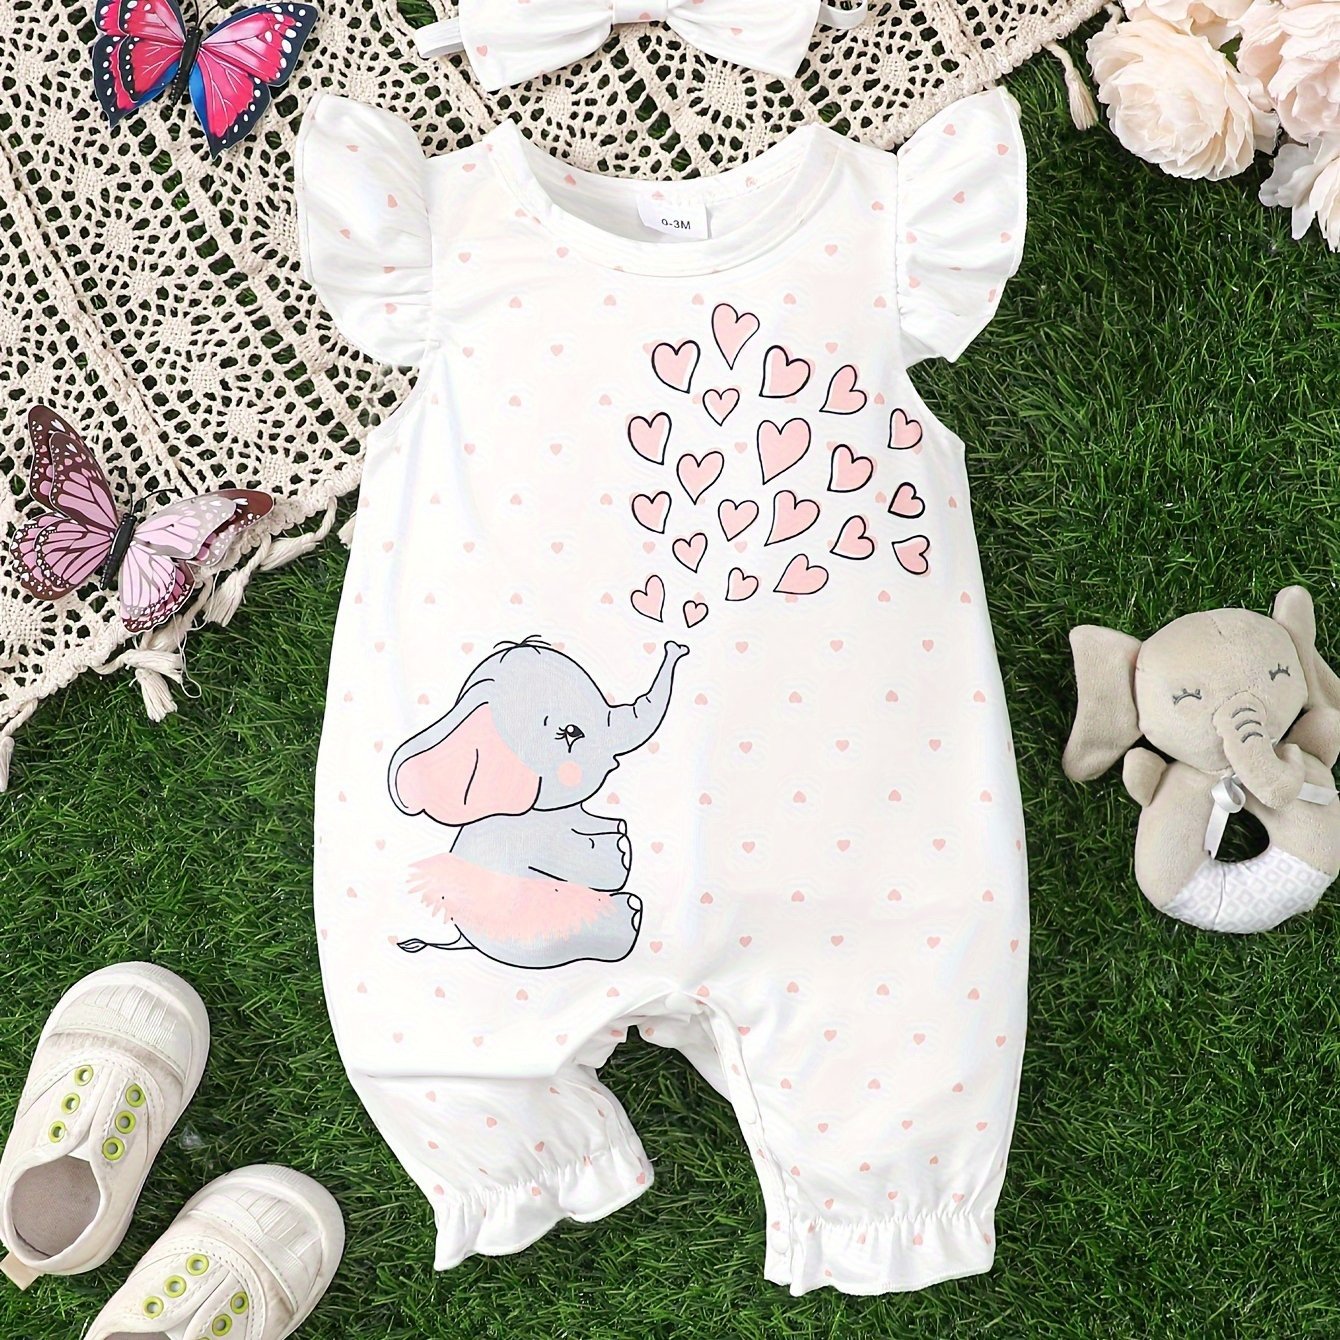 Adorable Baby Girls Elephant & Heart Print Romper Bodysuit with Matching Headband - Soft, Summer - Ready Outfit for Toddler & Infant Girls - Perfect Gift Idea - Ammpoure Wellbeing